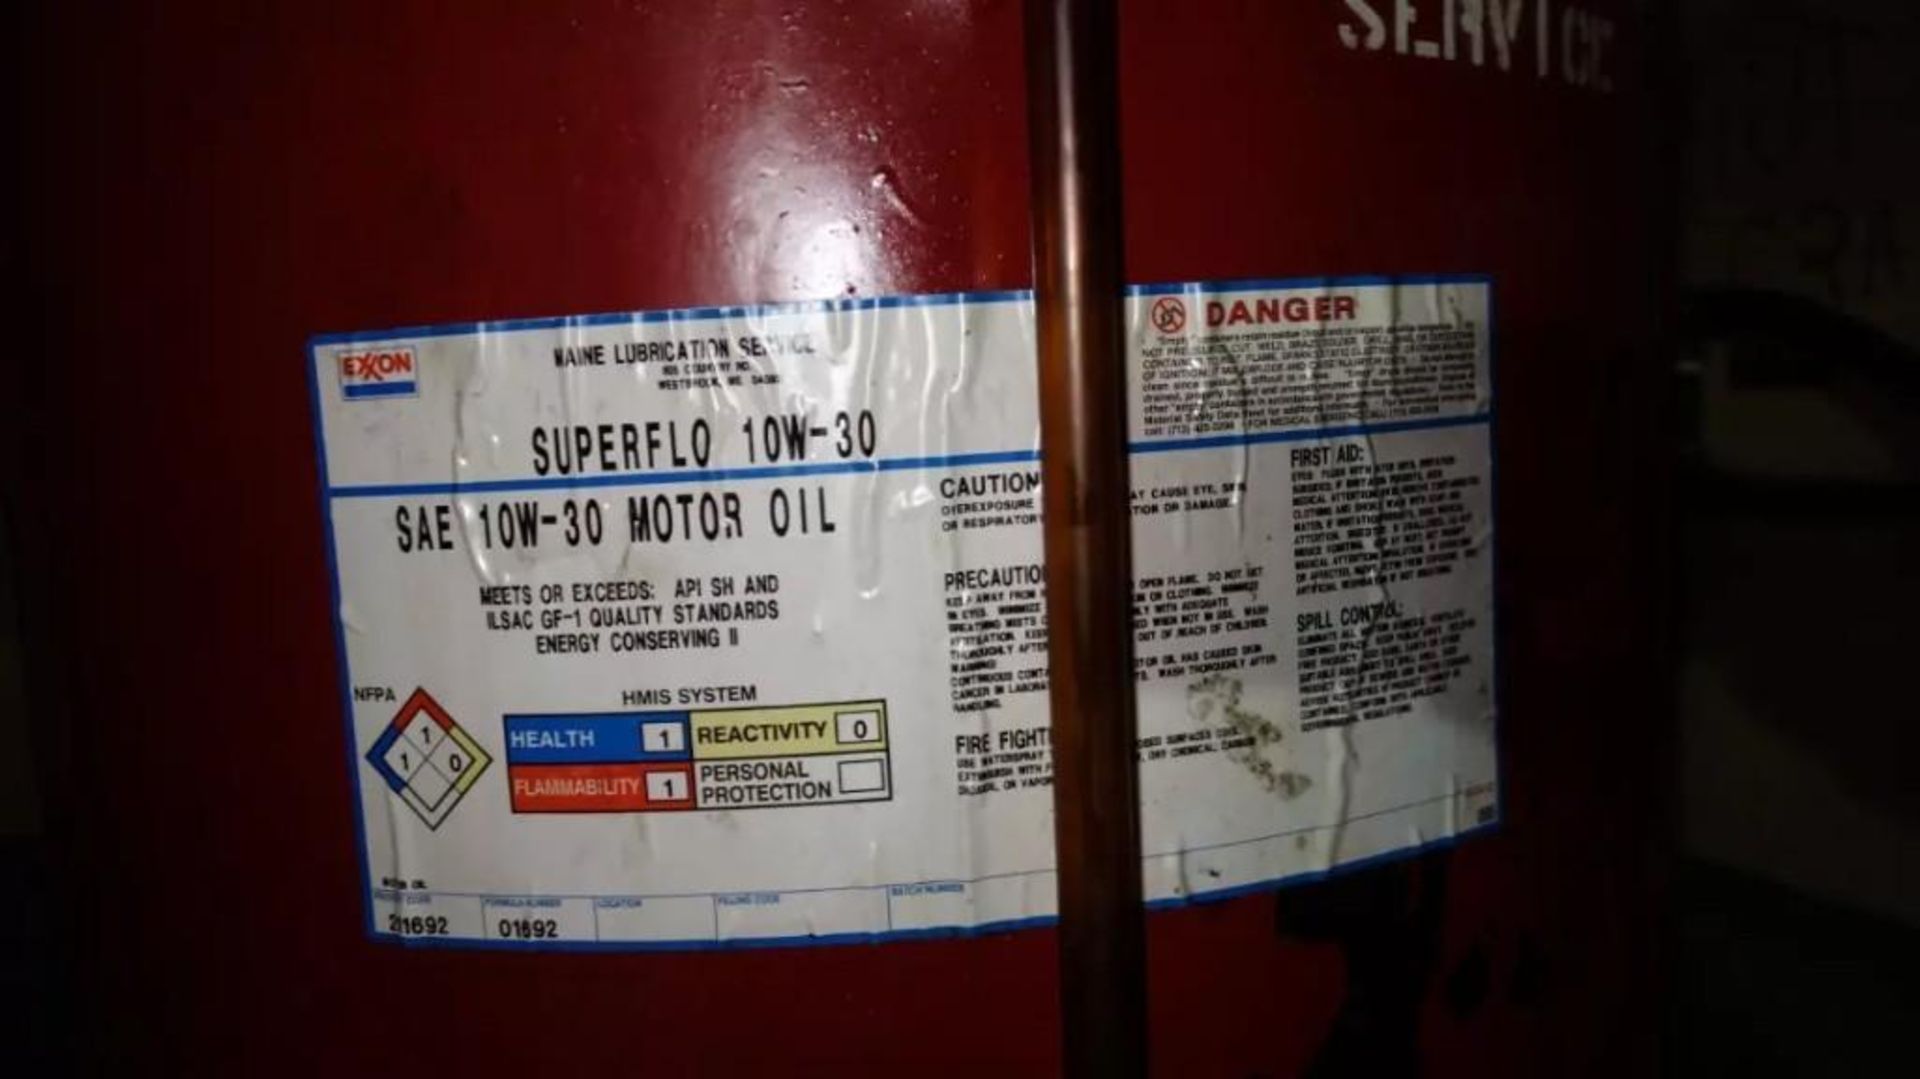 LOT OF 2 LUBRICATION OIL DRUMS WERE USED WITH EXXON 10W-30 OIL - Bild 4 aus 6